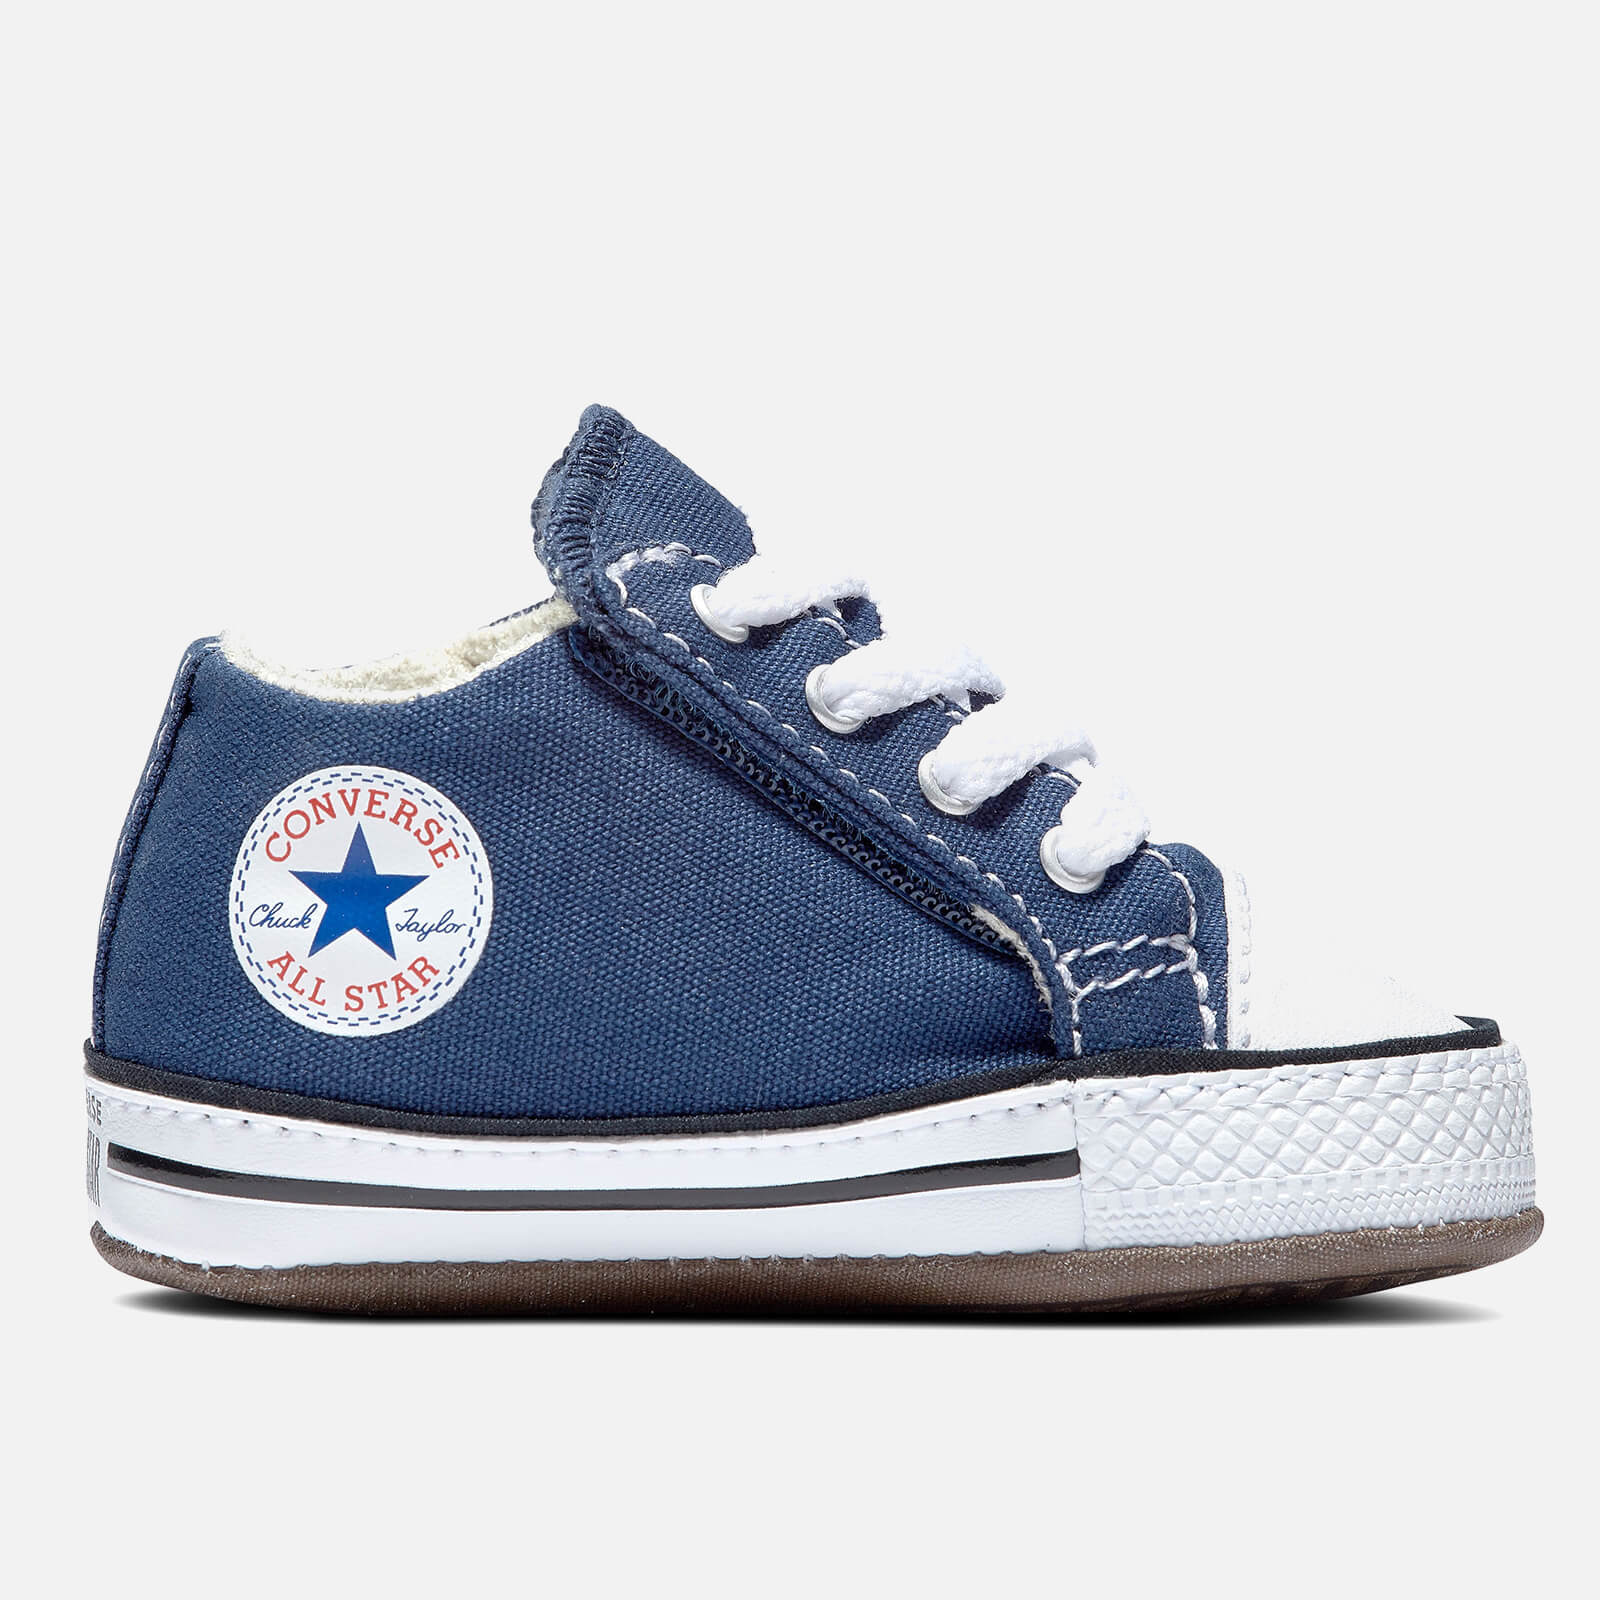 Converse Babys' Chuck Taylor All Star Cribster Soft Trainers - Navy - UK 4 Baby